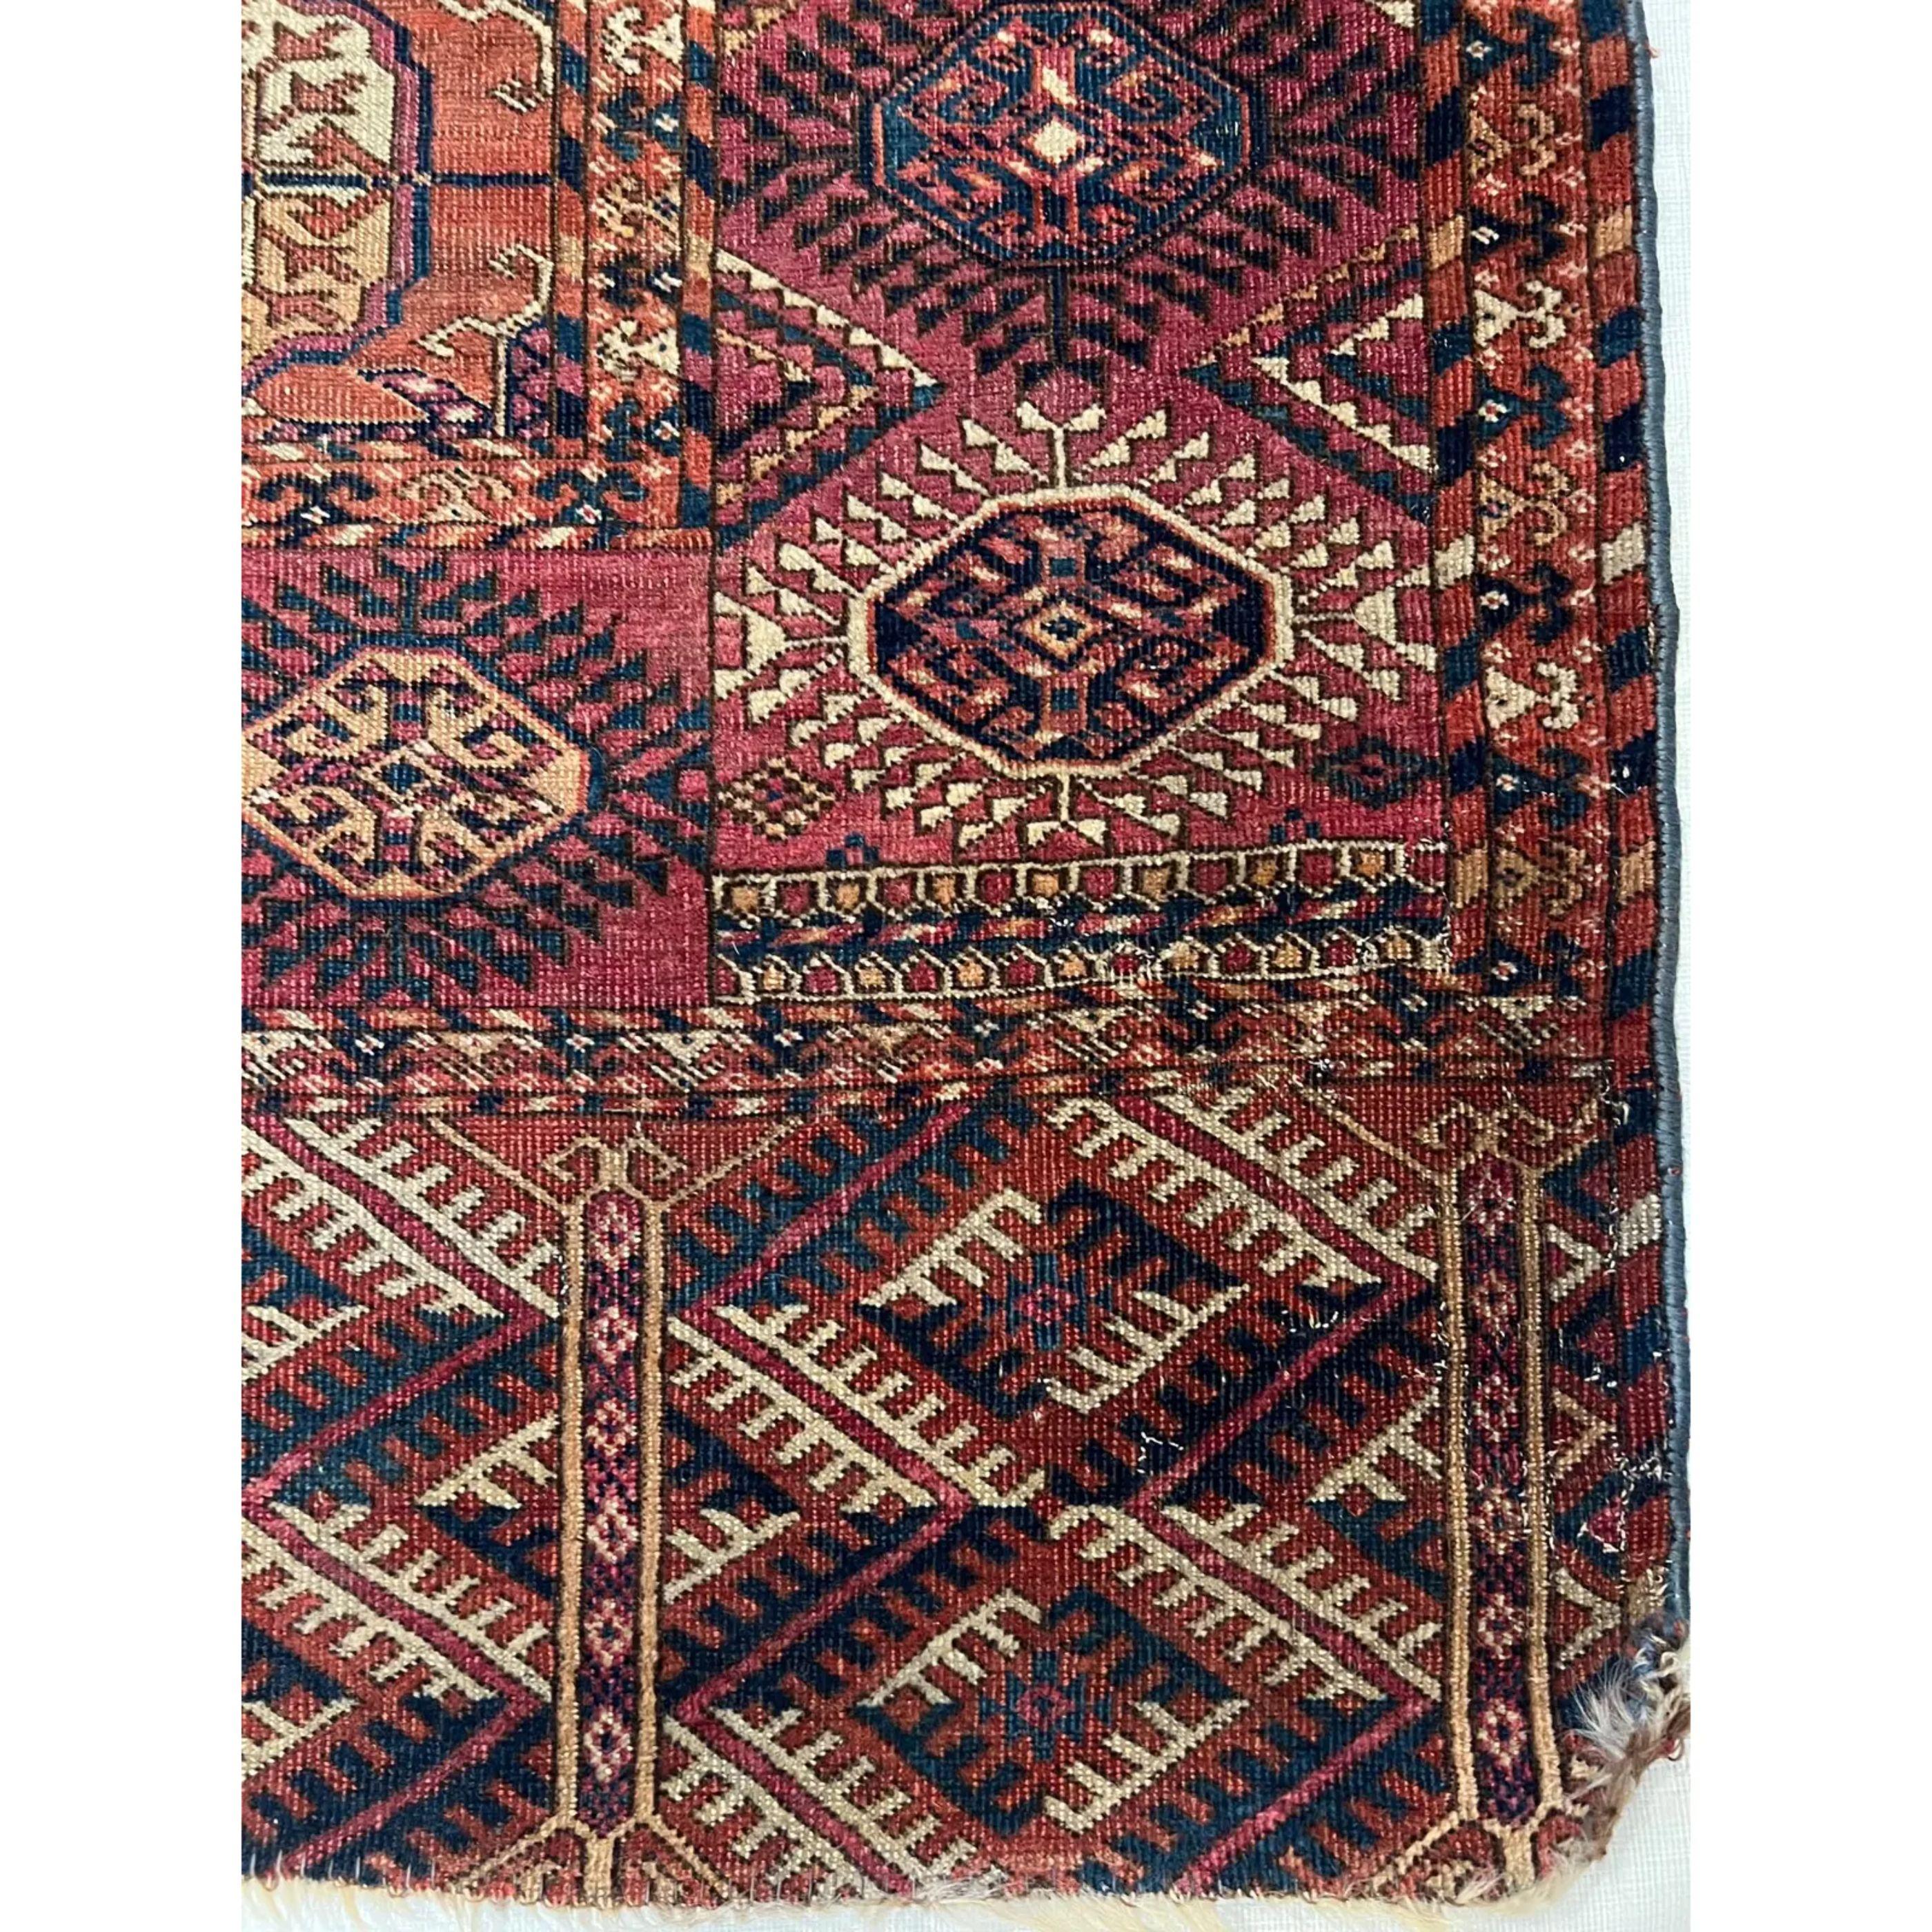 1900s Antique Tribal Bochara Rug, handmade and hand-knotted